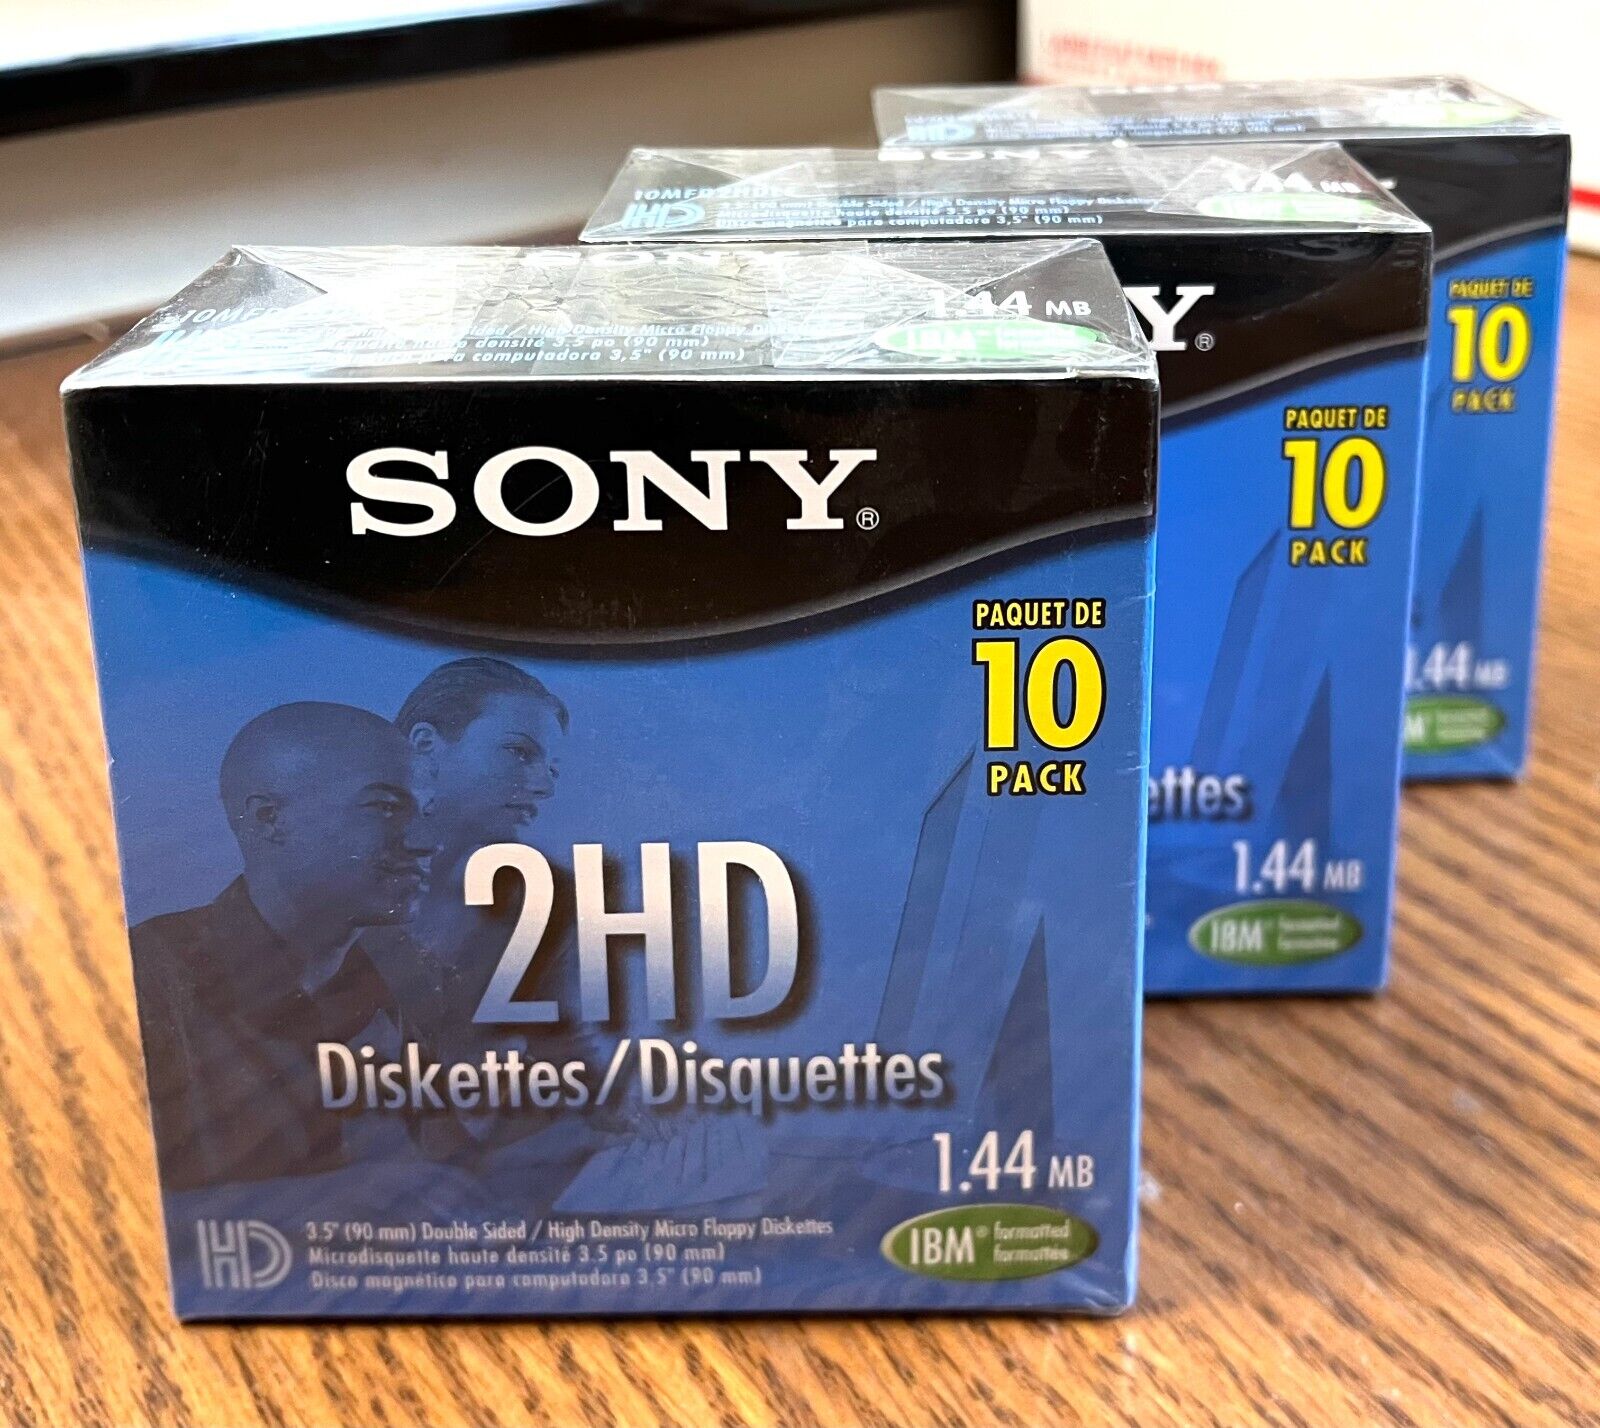 SONY 2HD 1.44MB Diskettes / IBM formatted (3 SEALED NEW boxes of 10)